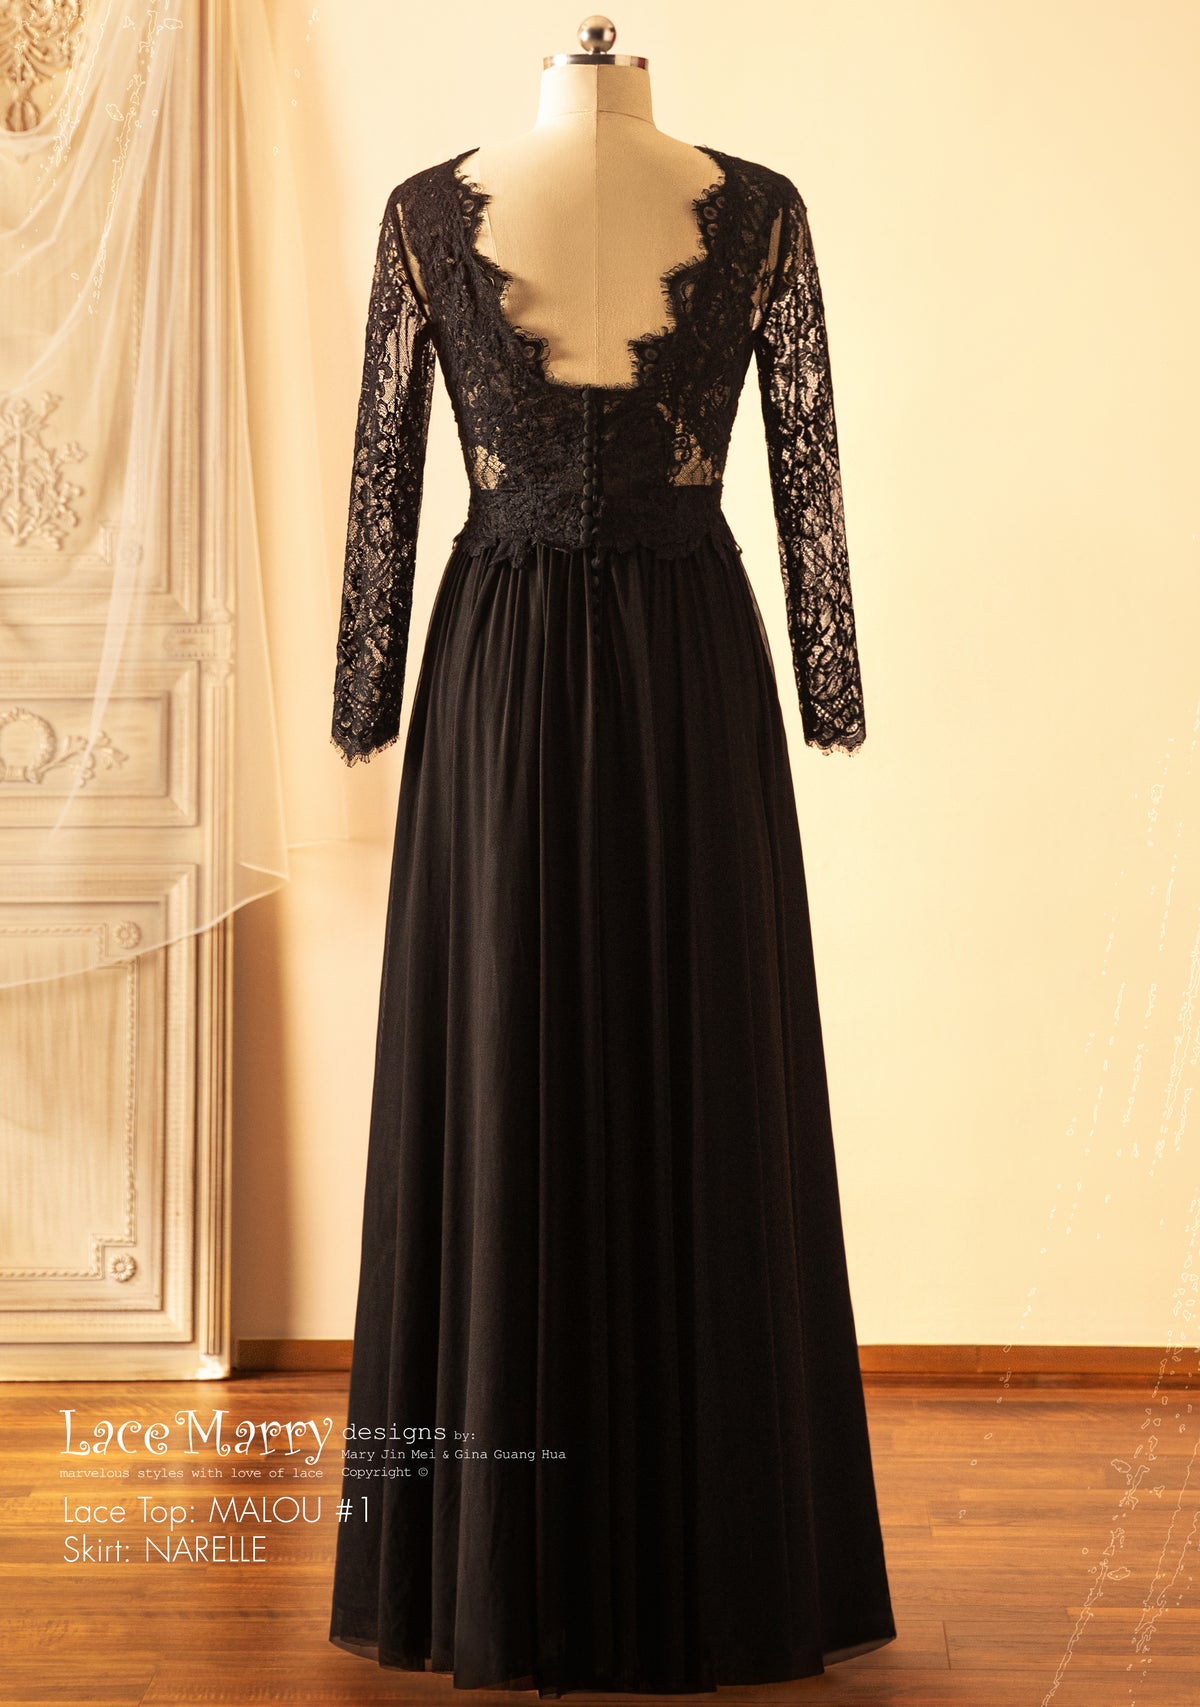 Black Wedding Dress Crop Set with Plain Tulle Skirt and Long Sleeves Lace Top